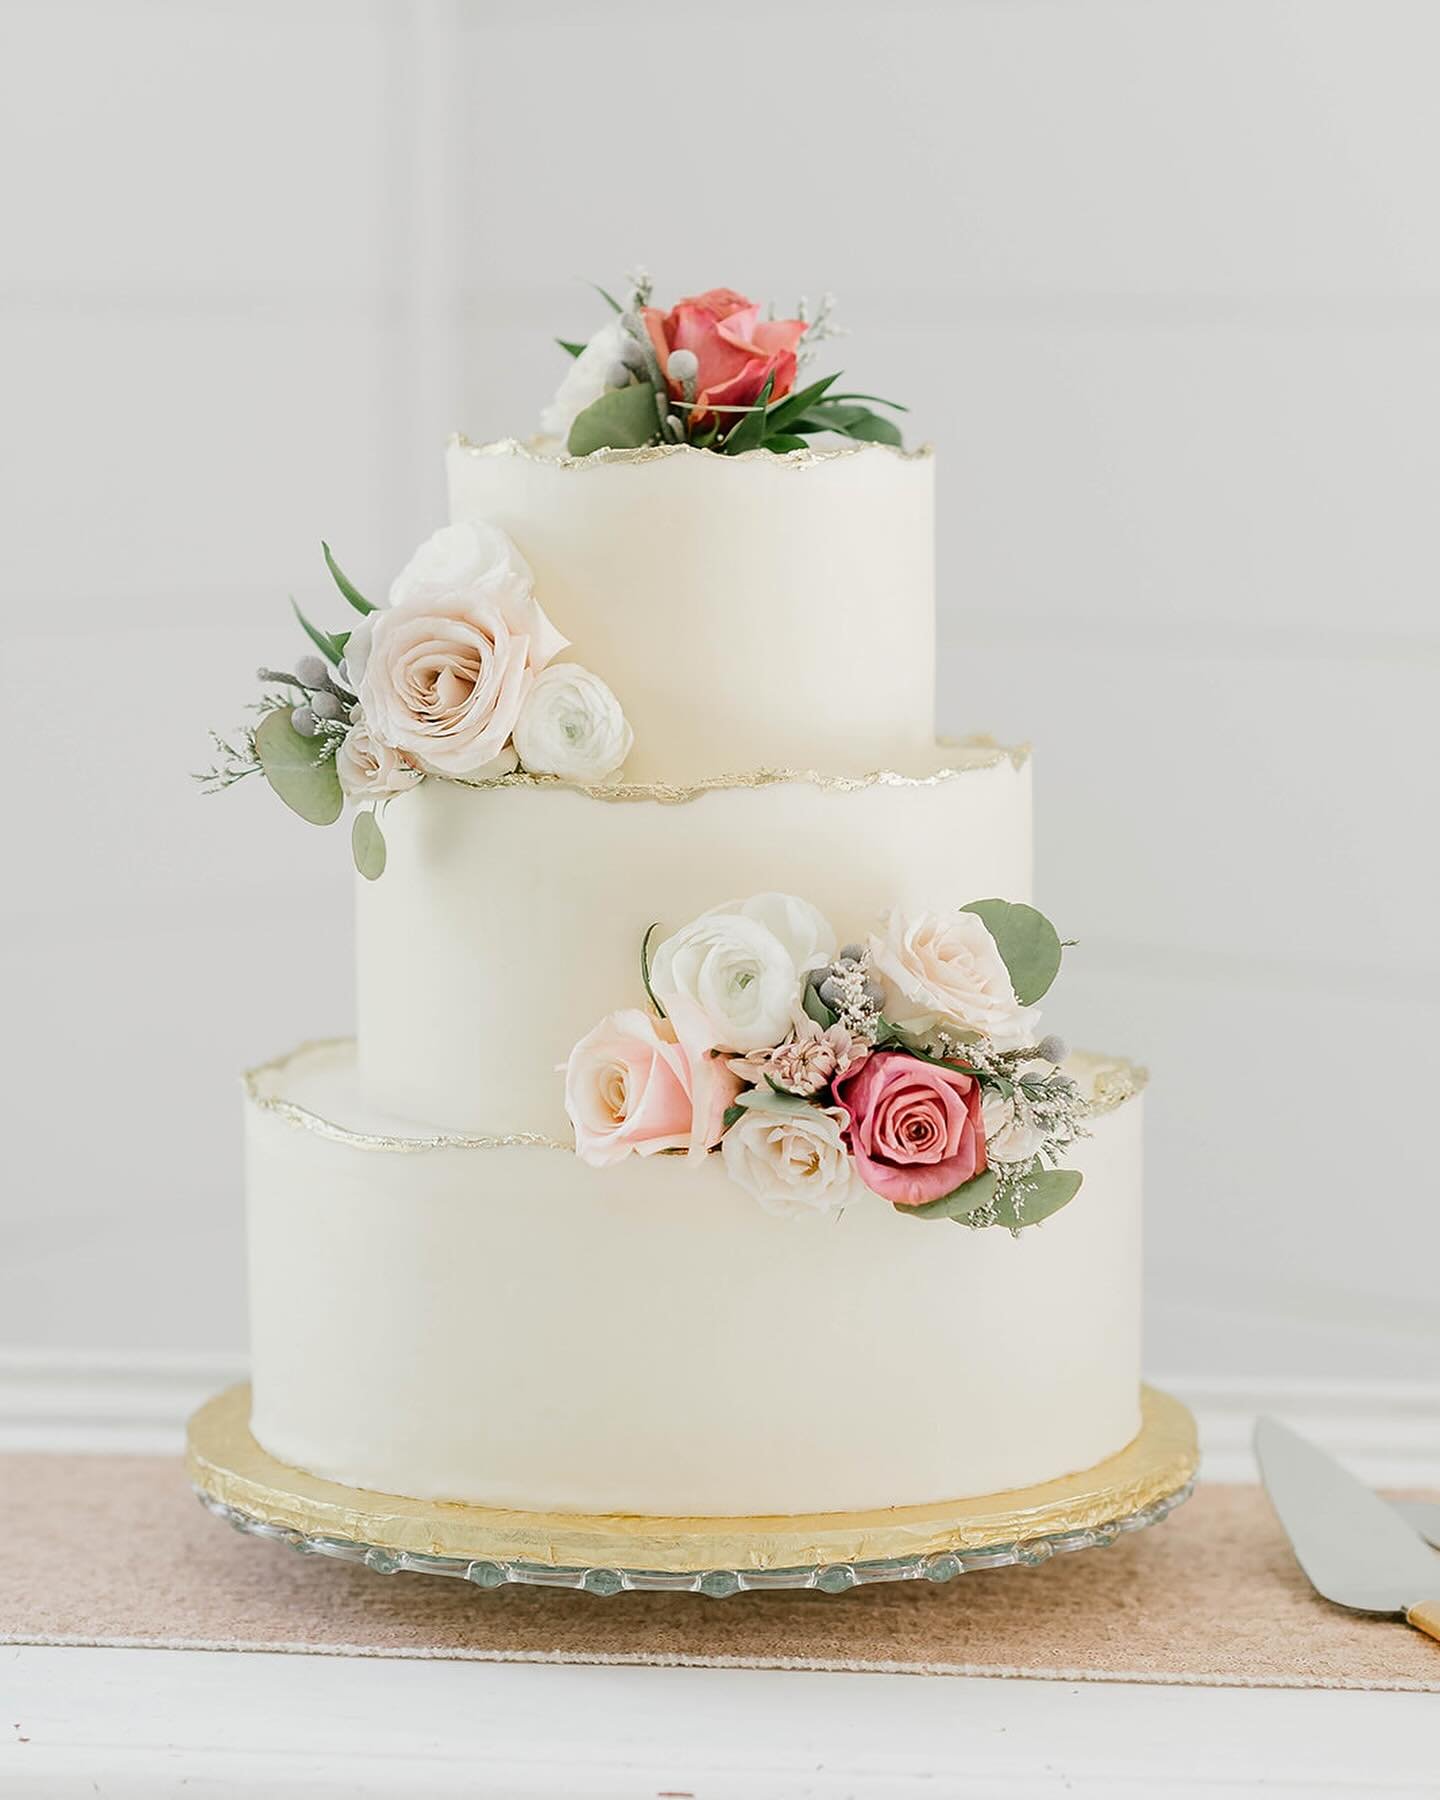 This cake just needs its own moment! 

Venue: @thewildsvenue
Catering: @owcatering
Cake: @heavenlysweets_noblesville
Photos: @rebeccashehornphoto
Video: @3to1video
Florals: @georgethomasflorist
DJ: @dj.connection
Music: @thedeocensemble
Beauty: @some